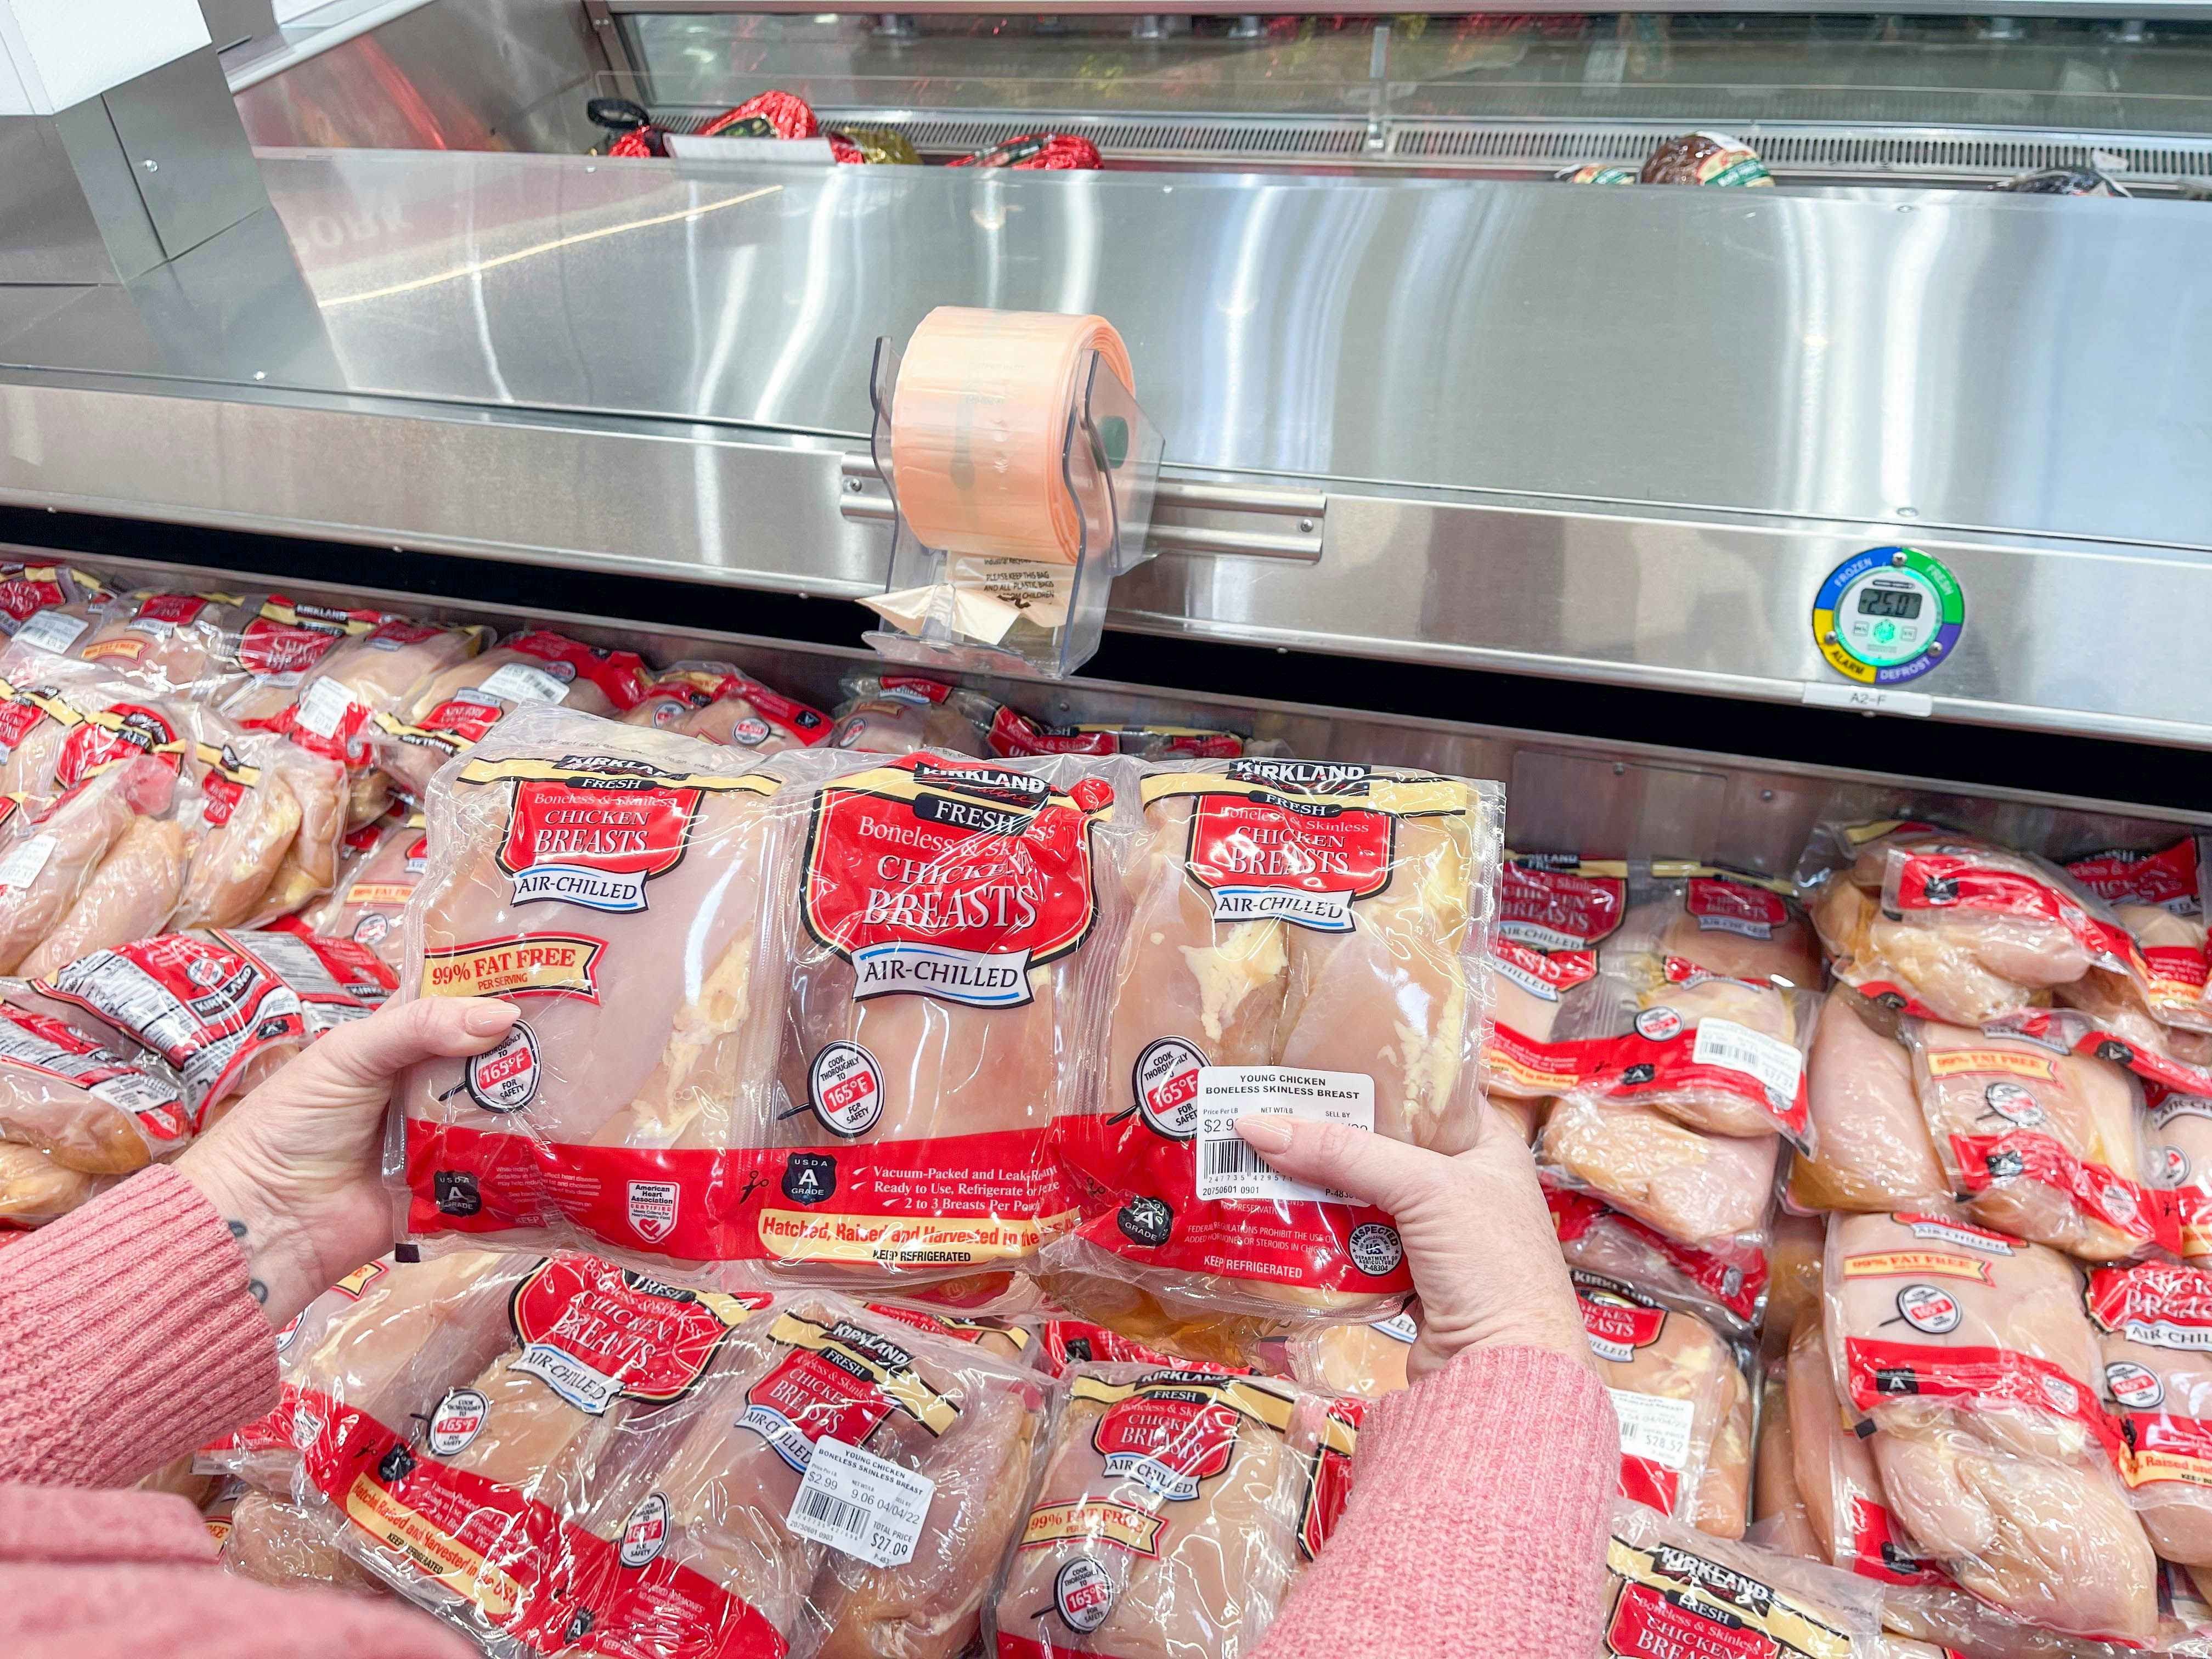 A person's hands holding up a three-pack of Kirkland raw chicken breasts above a cooler full of the same product inside Costco.